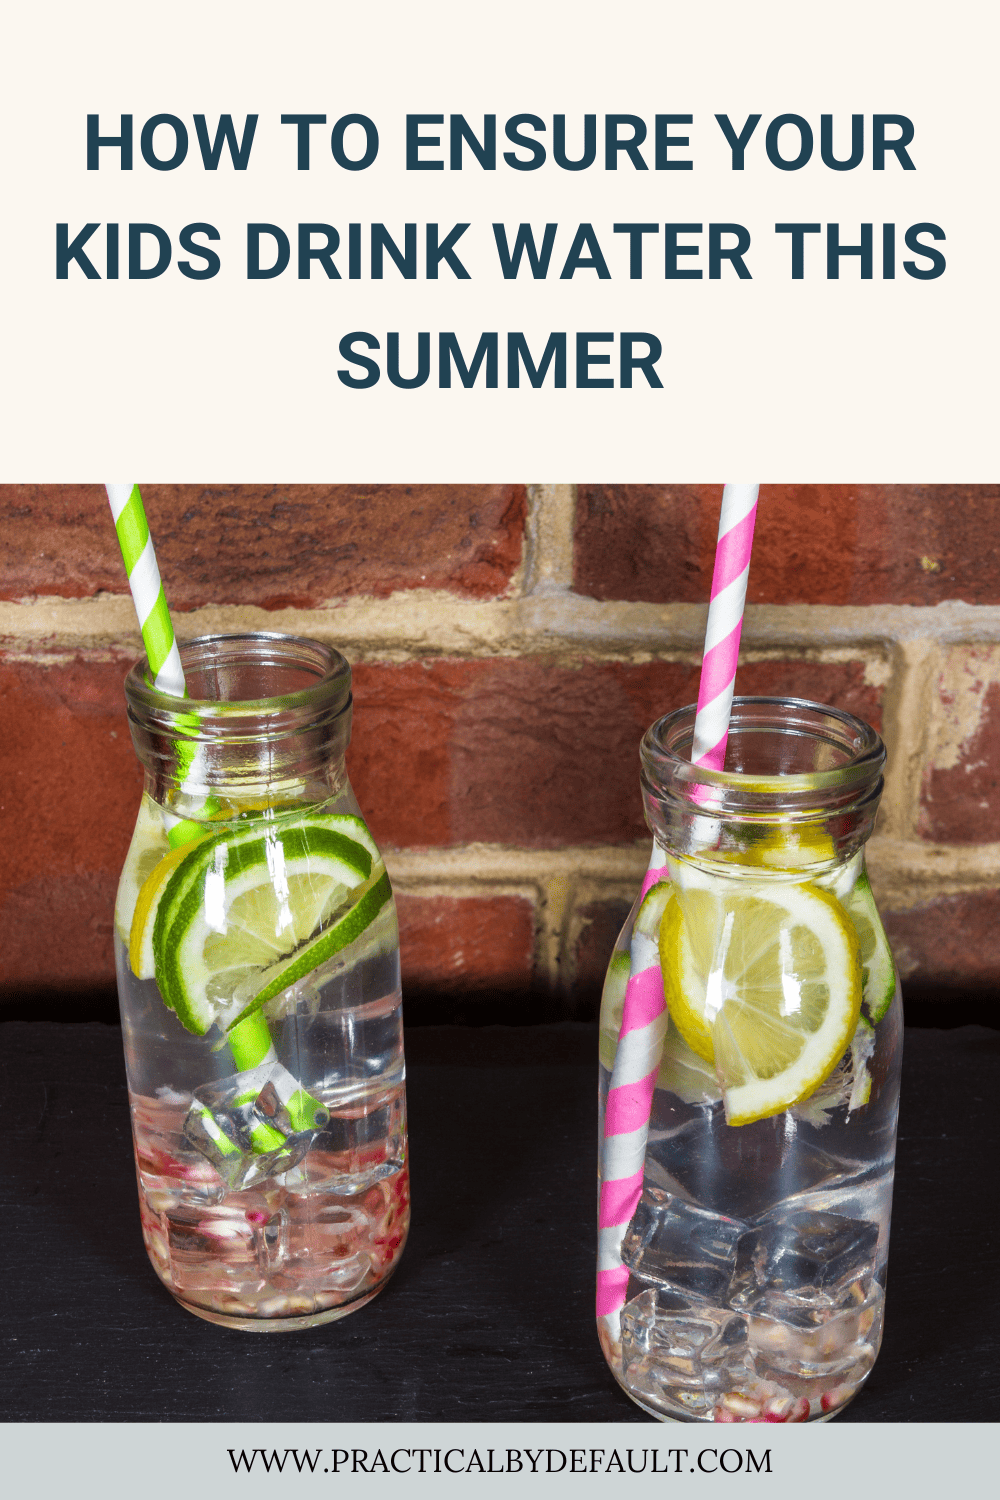 How to Ensure Your Kids Drink Water This Summer